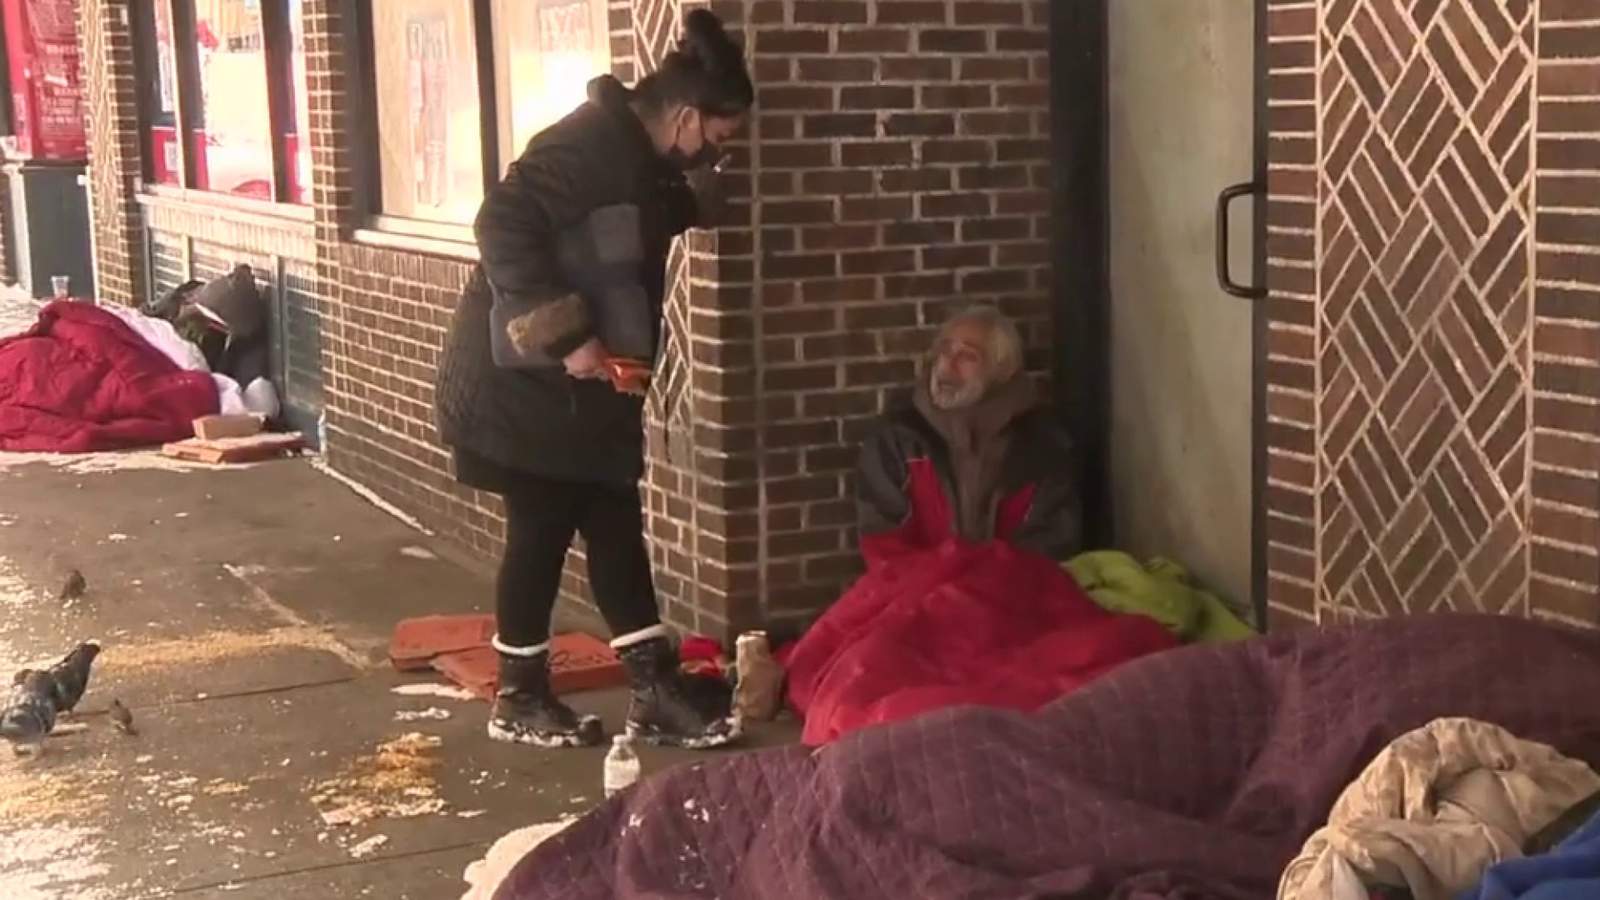 Outreach workers brave bitter cold to help the homeless in San Antonio